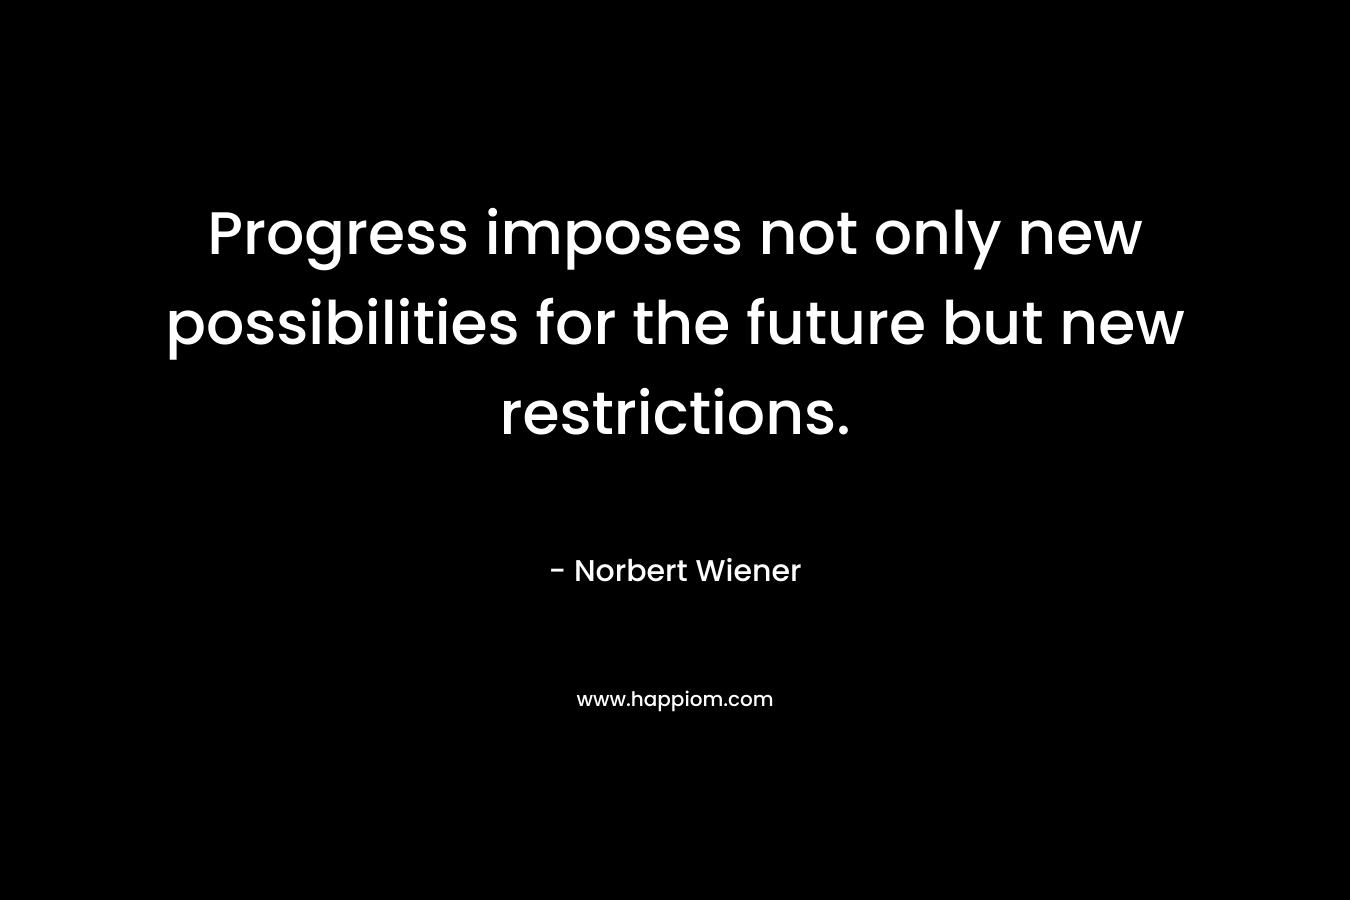 Progress imposes not only new possibilities for the future but new restrictions.